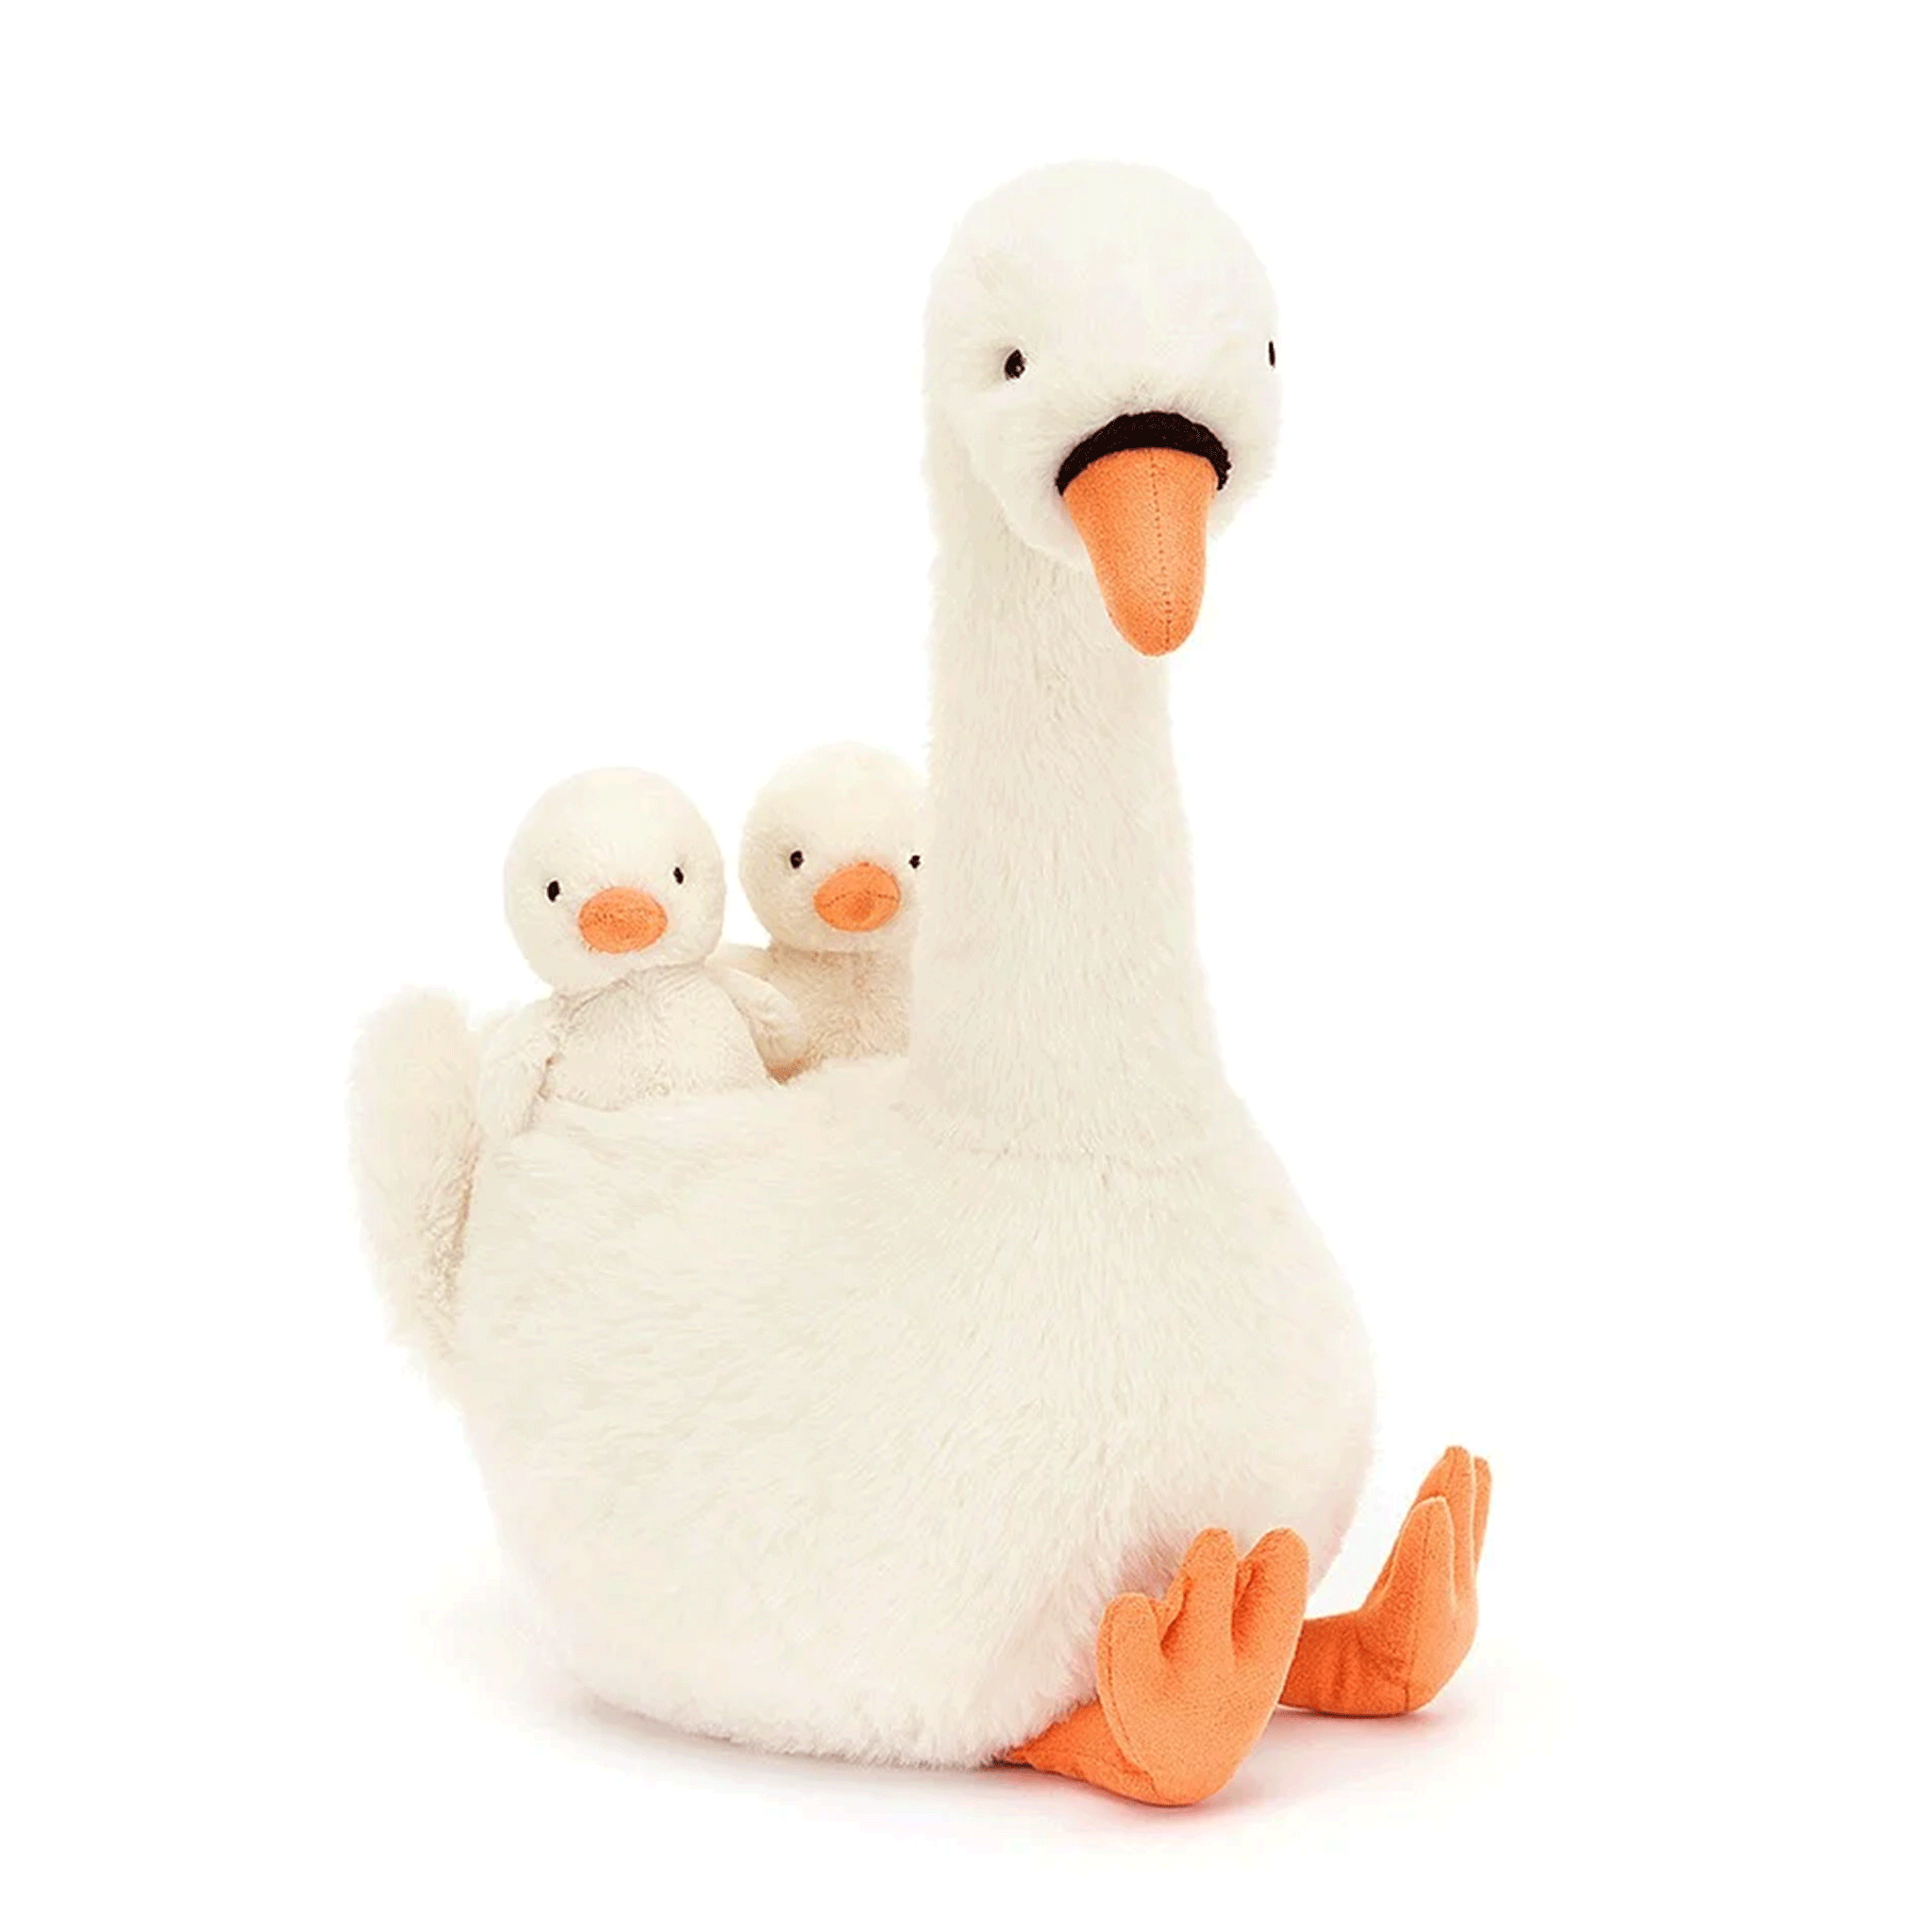 On a white background is a swan shaped stuffed animal toy with two baby swans on her back. 